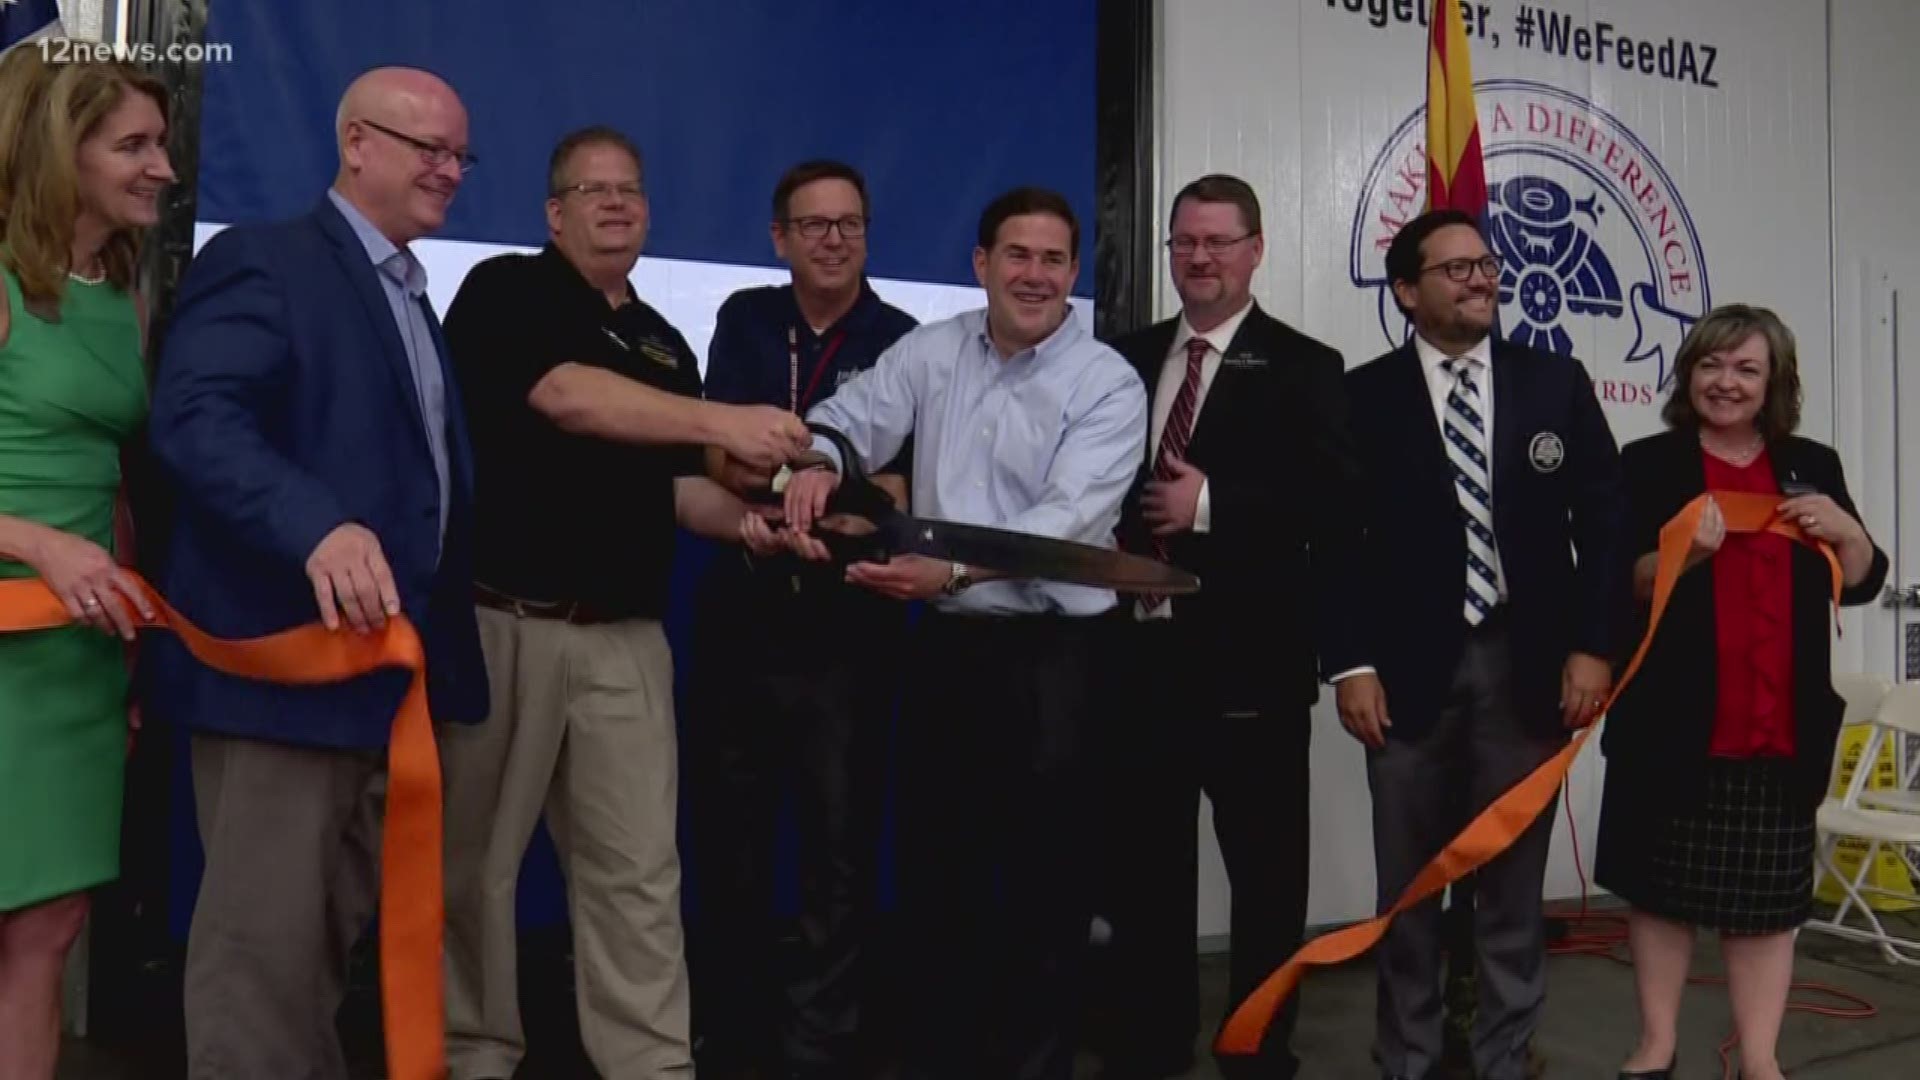 The governor was present for a ribbon cutting ceremony for a bran new refrigerator at the United Food Bank warehouse.